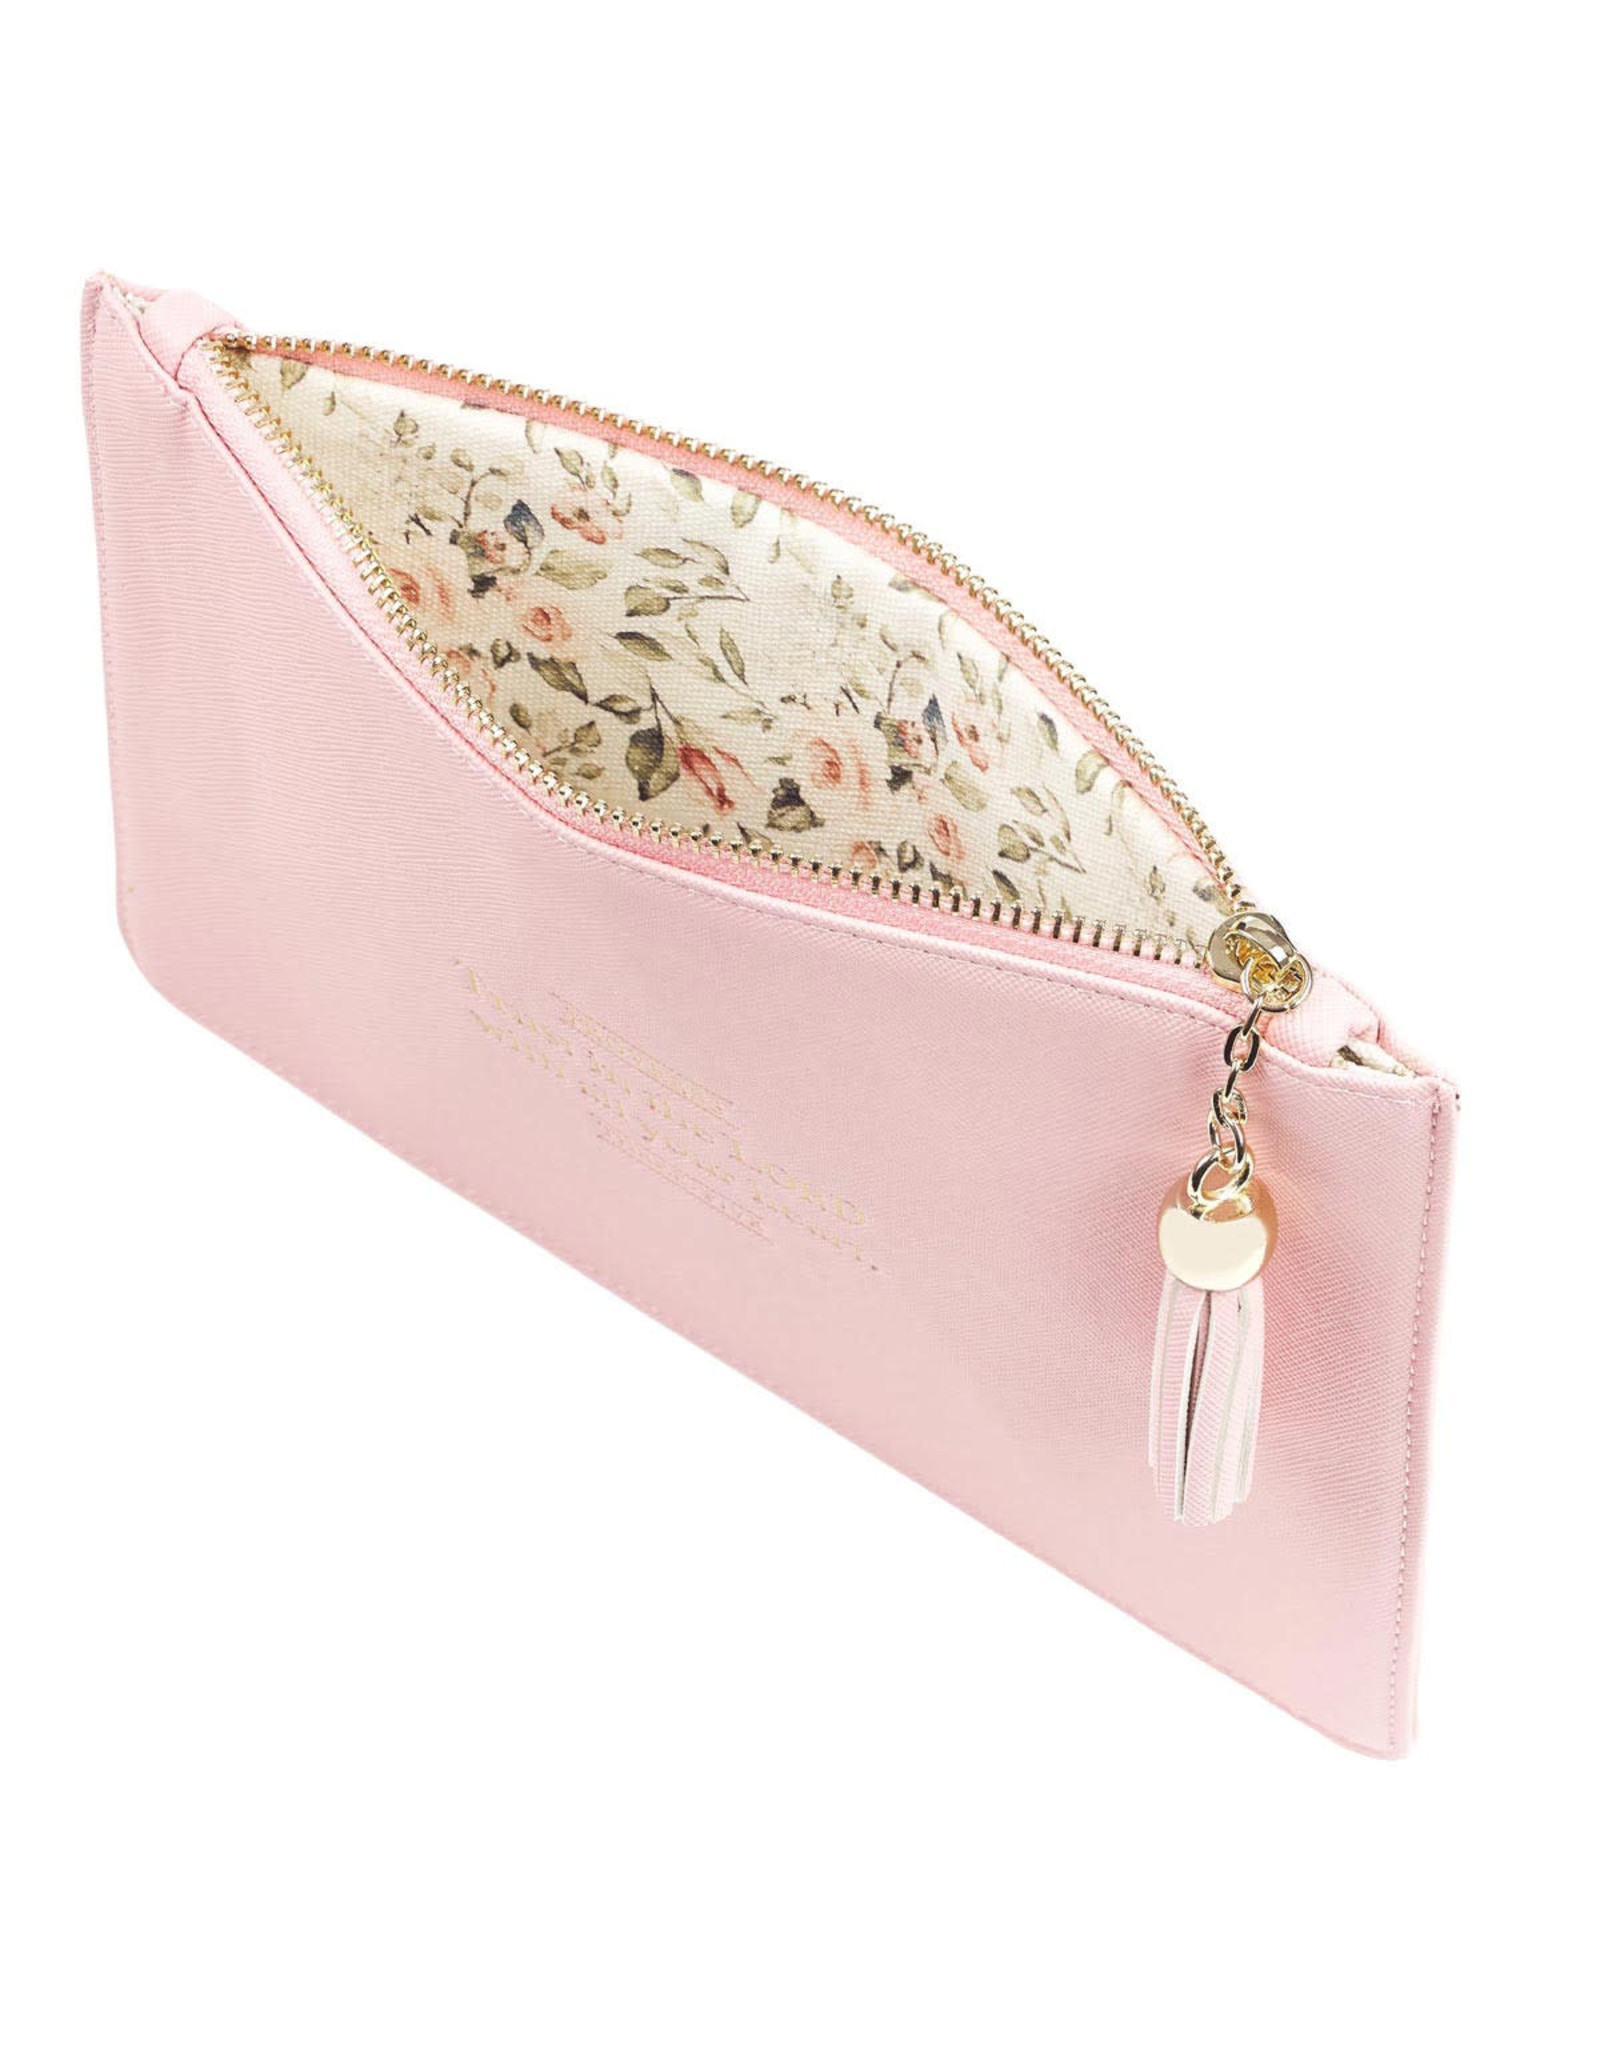 Pouch - Trust in the Lord, Blush LuxLeather- Proverbs 3:5